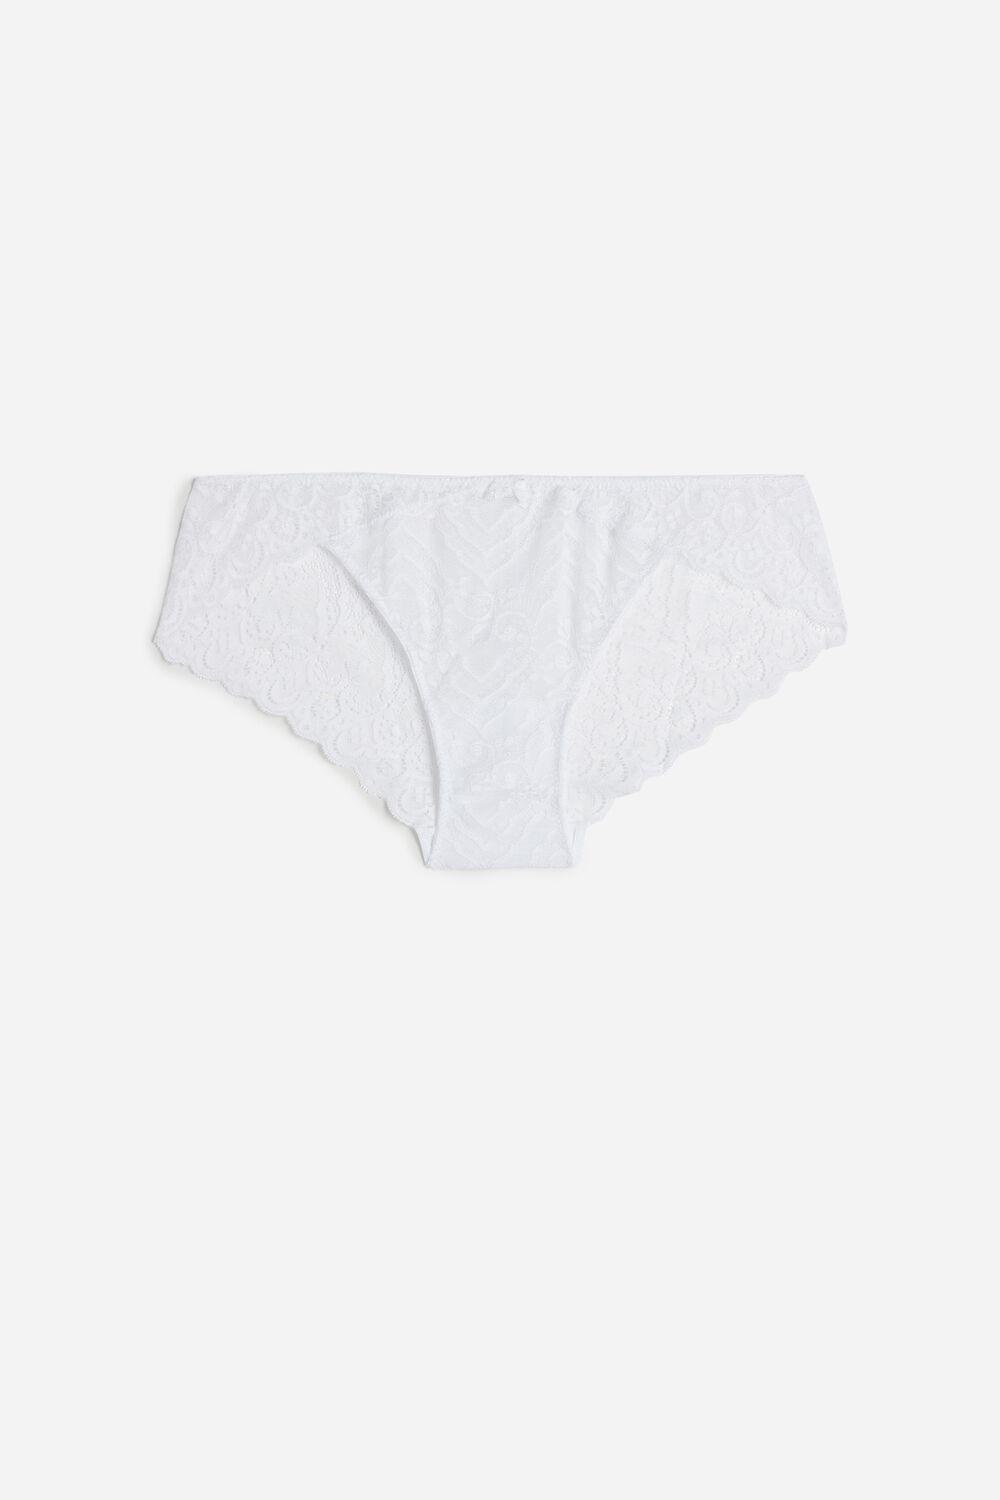 Intimissimi Lace Low-rise Panties in White - Lyst